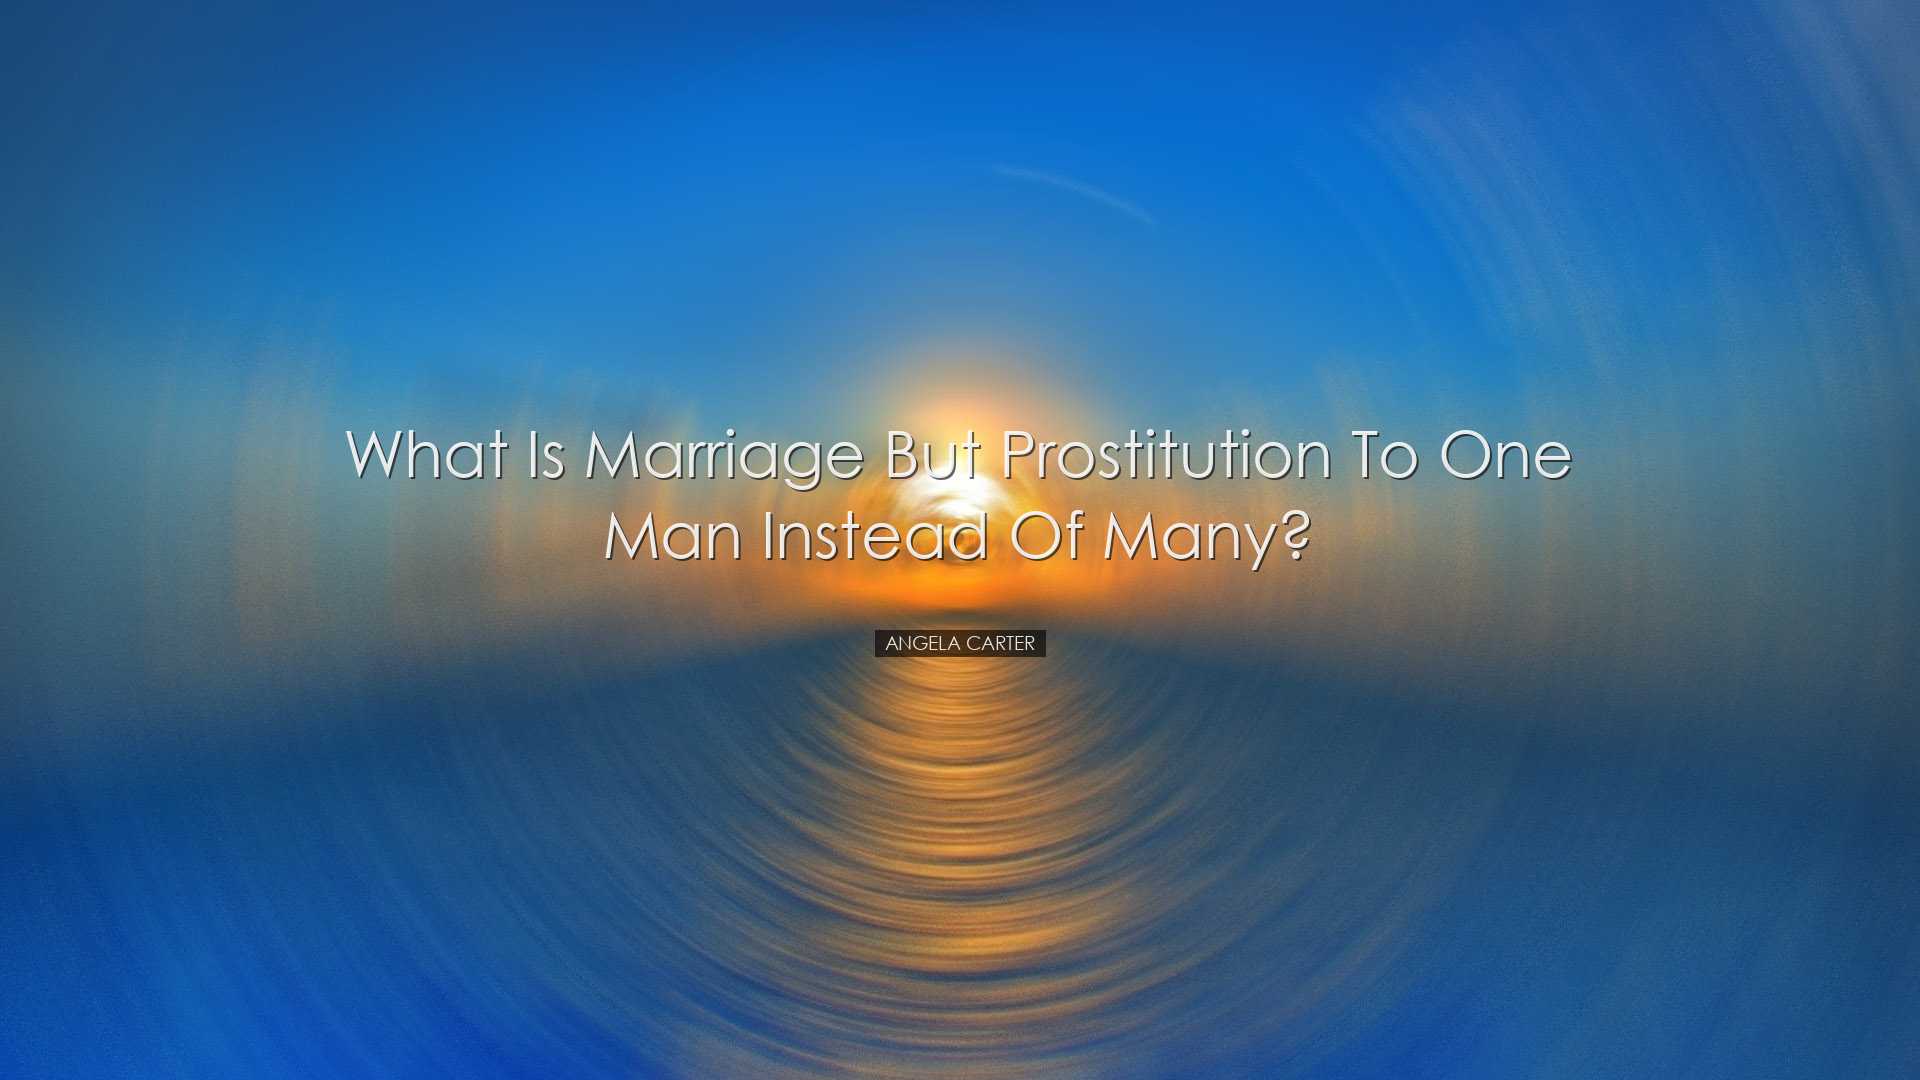 What is marriage but prostitution to one man instead of many? - An